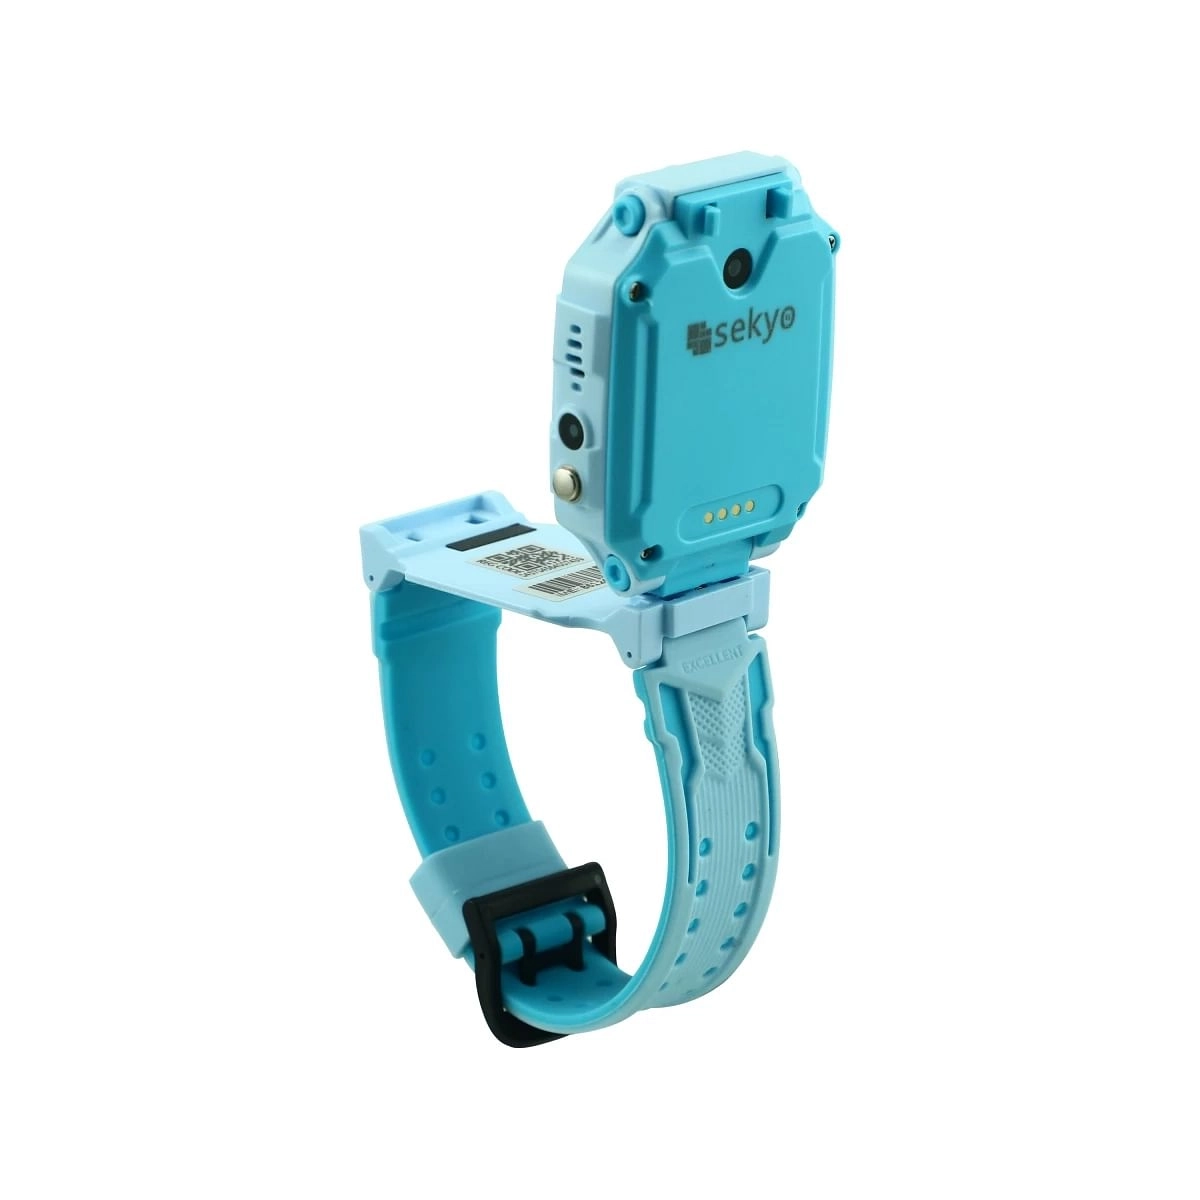 Sekyo Spin Blue phone Watch for Kids Blue 3Y+